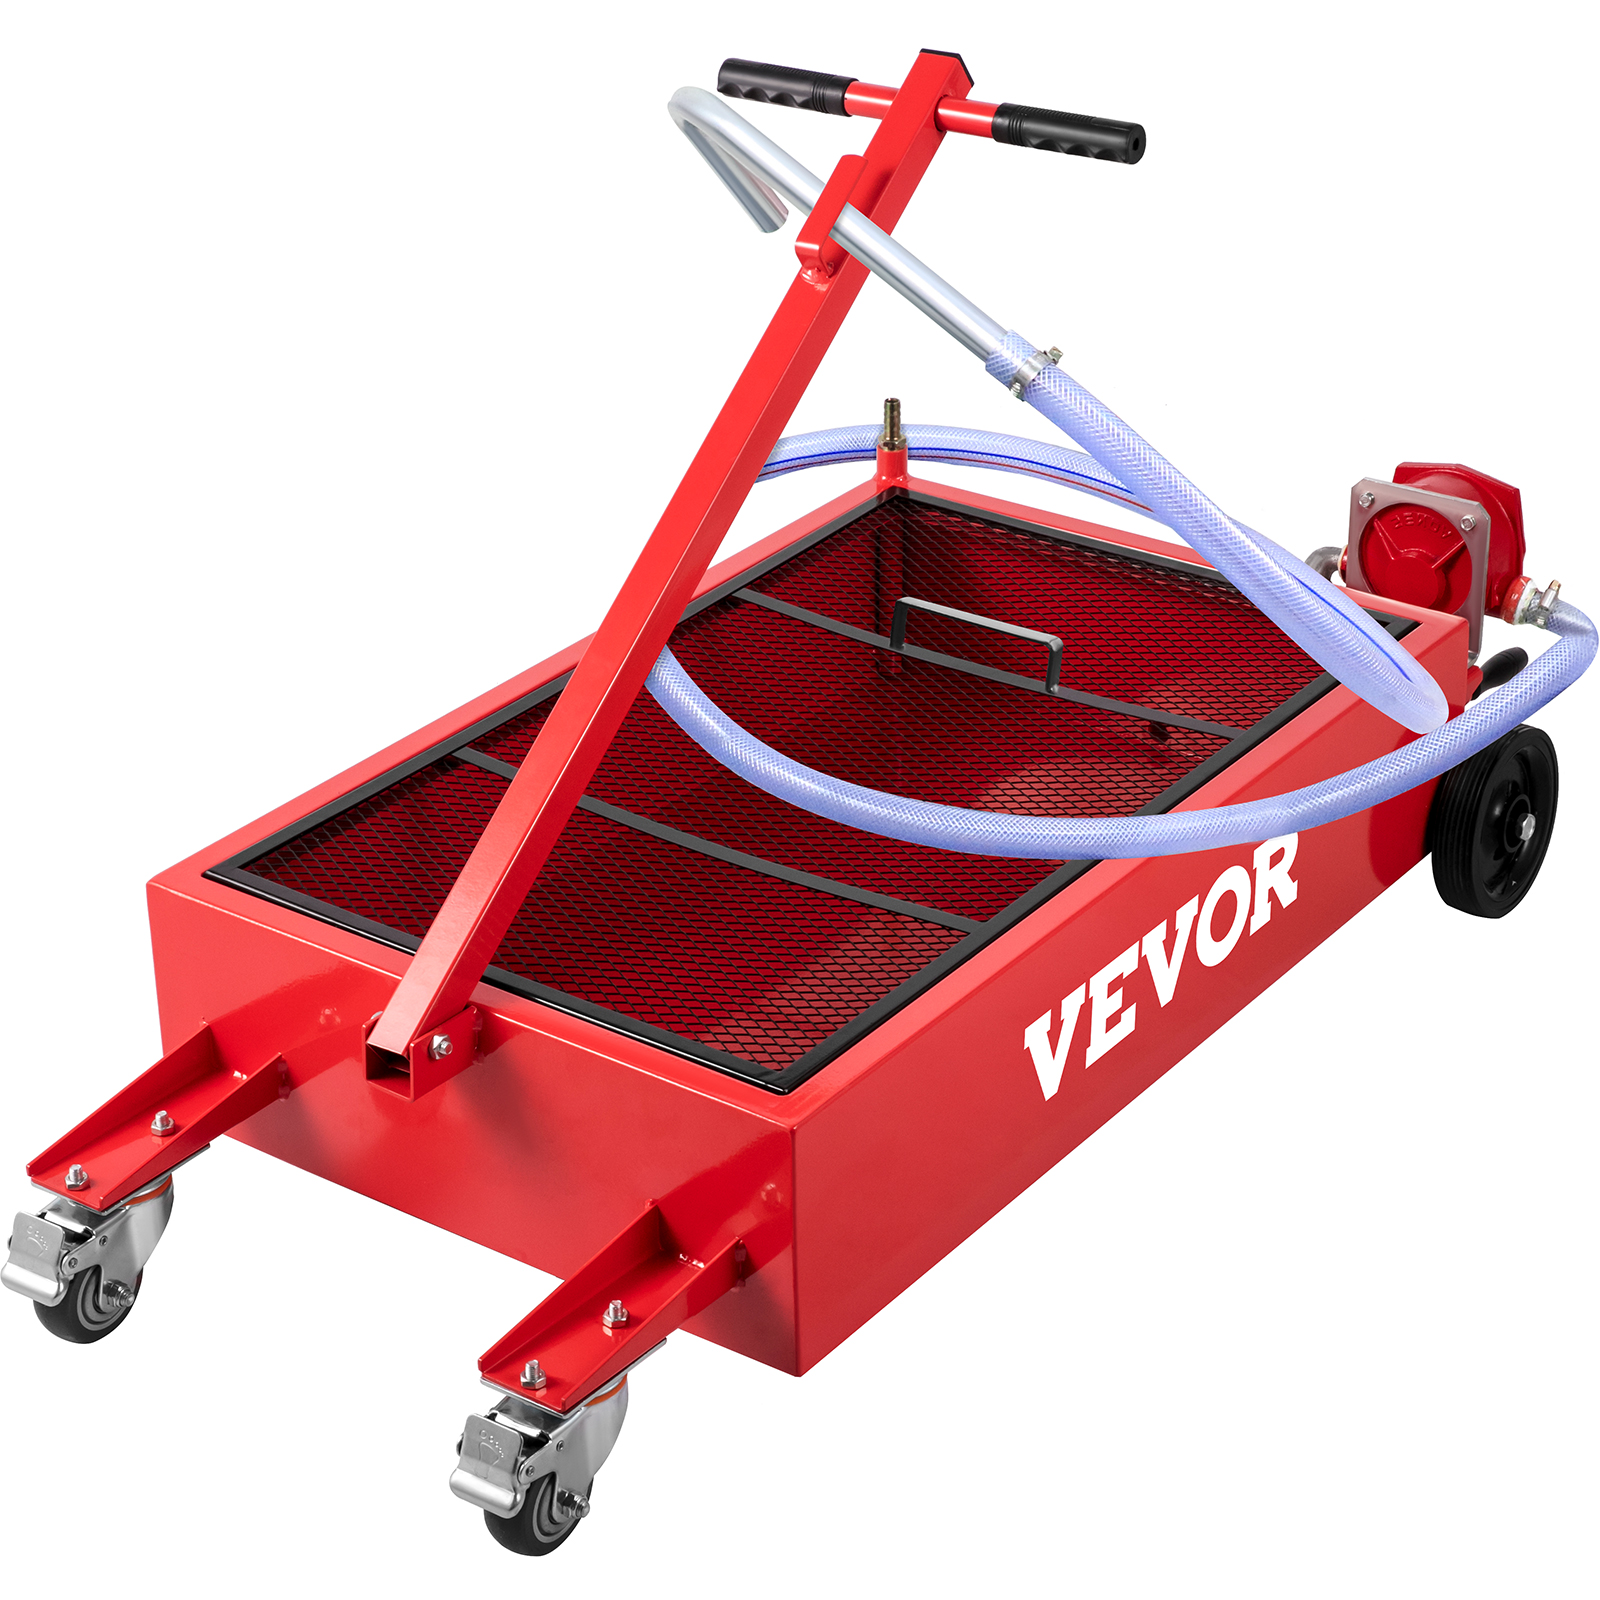 Vevor Low Profile Oil Drain Pan Truck Drain Pan 20 Gallon With Pump Hose Casters от Vevor Many GEOs